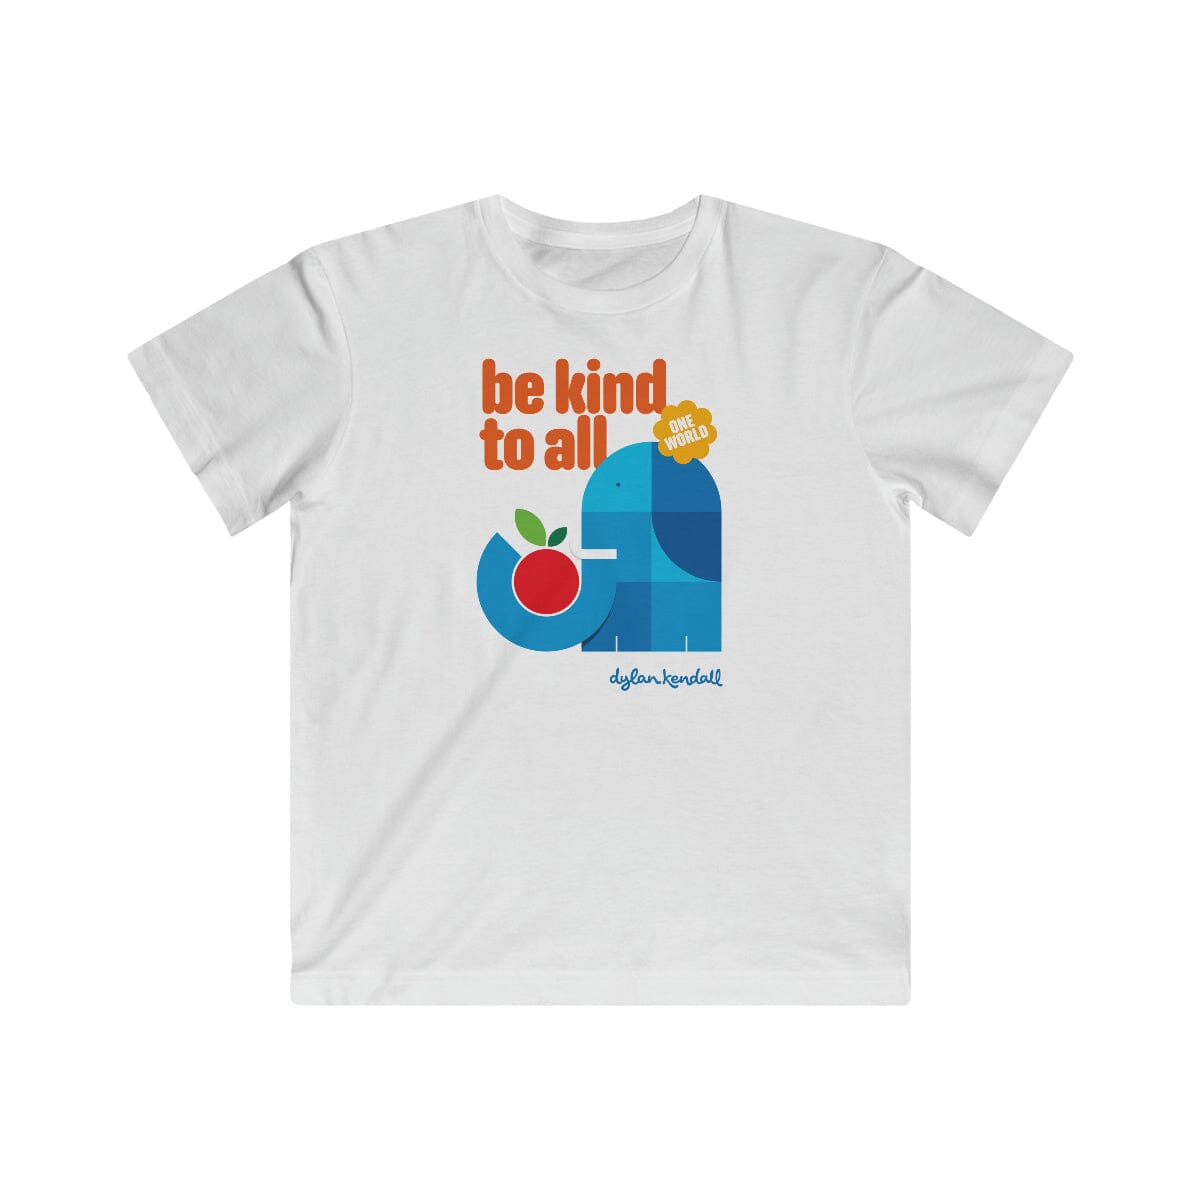 Be Kids T-Shirt To All! Kind |